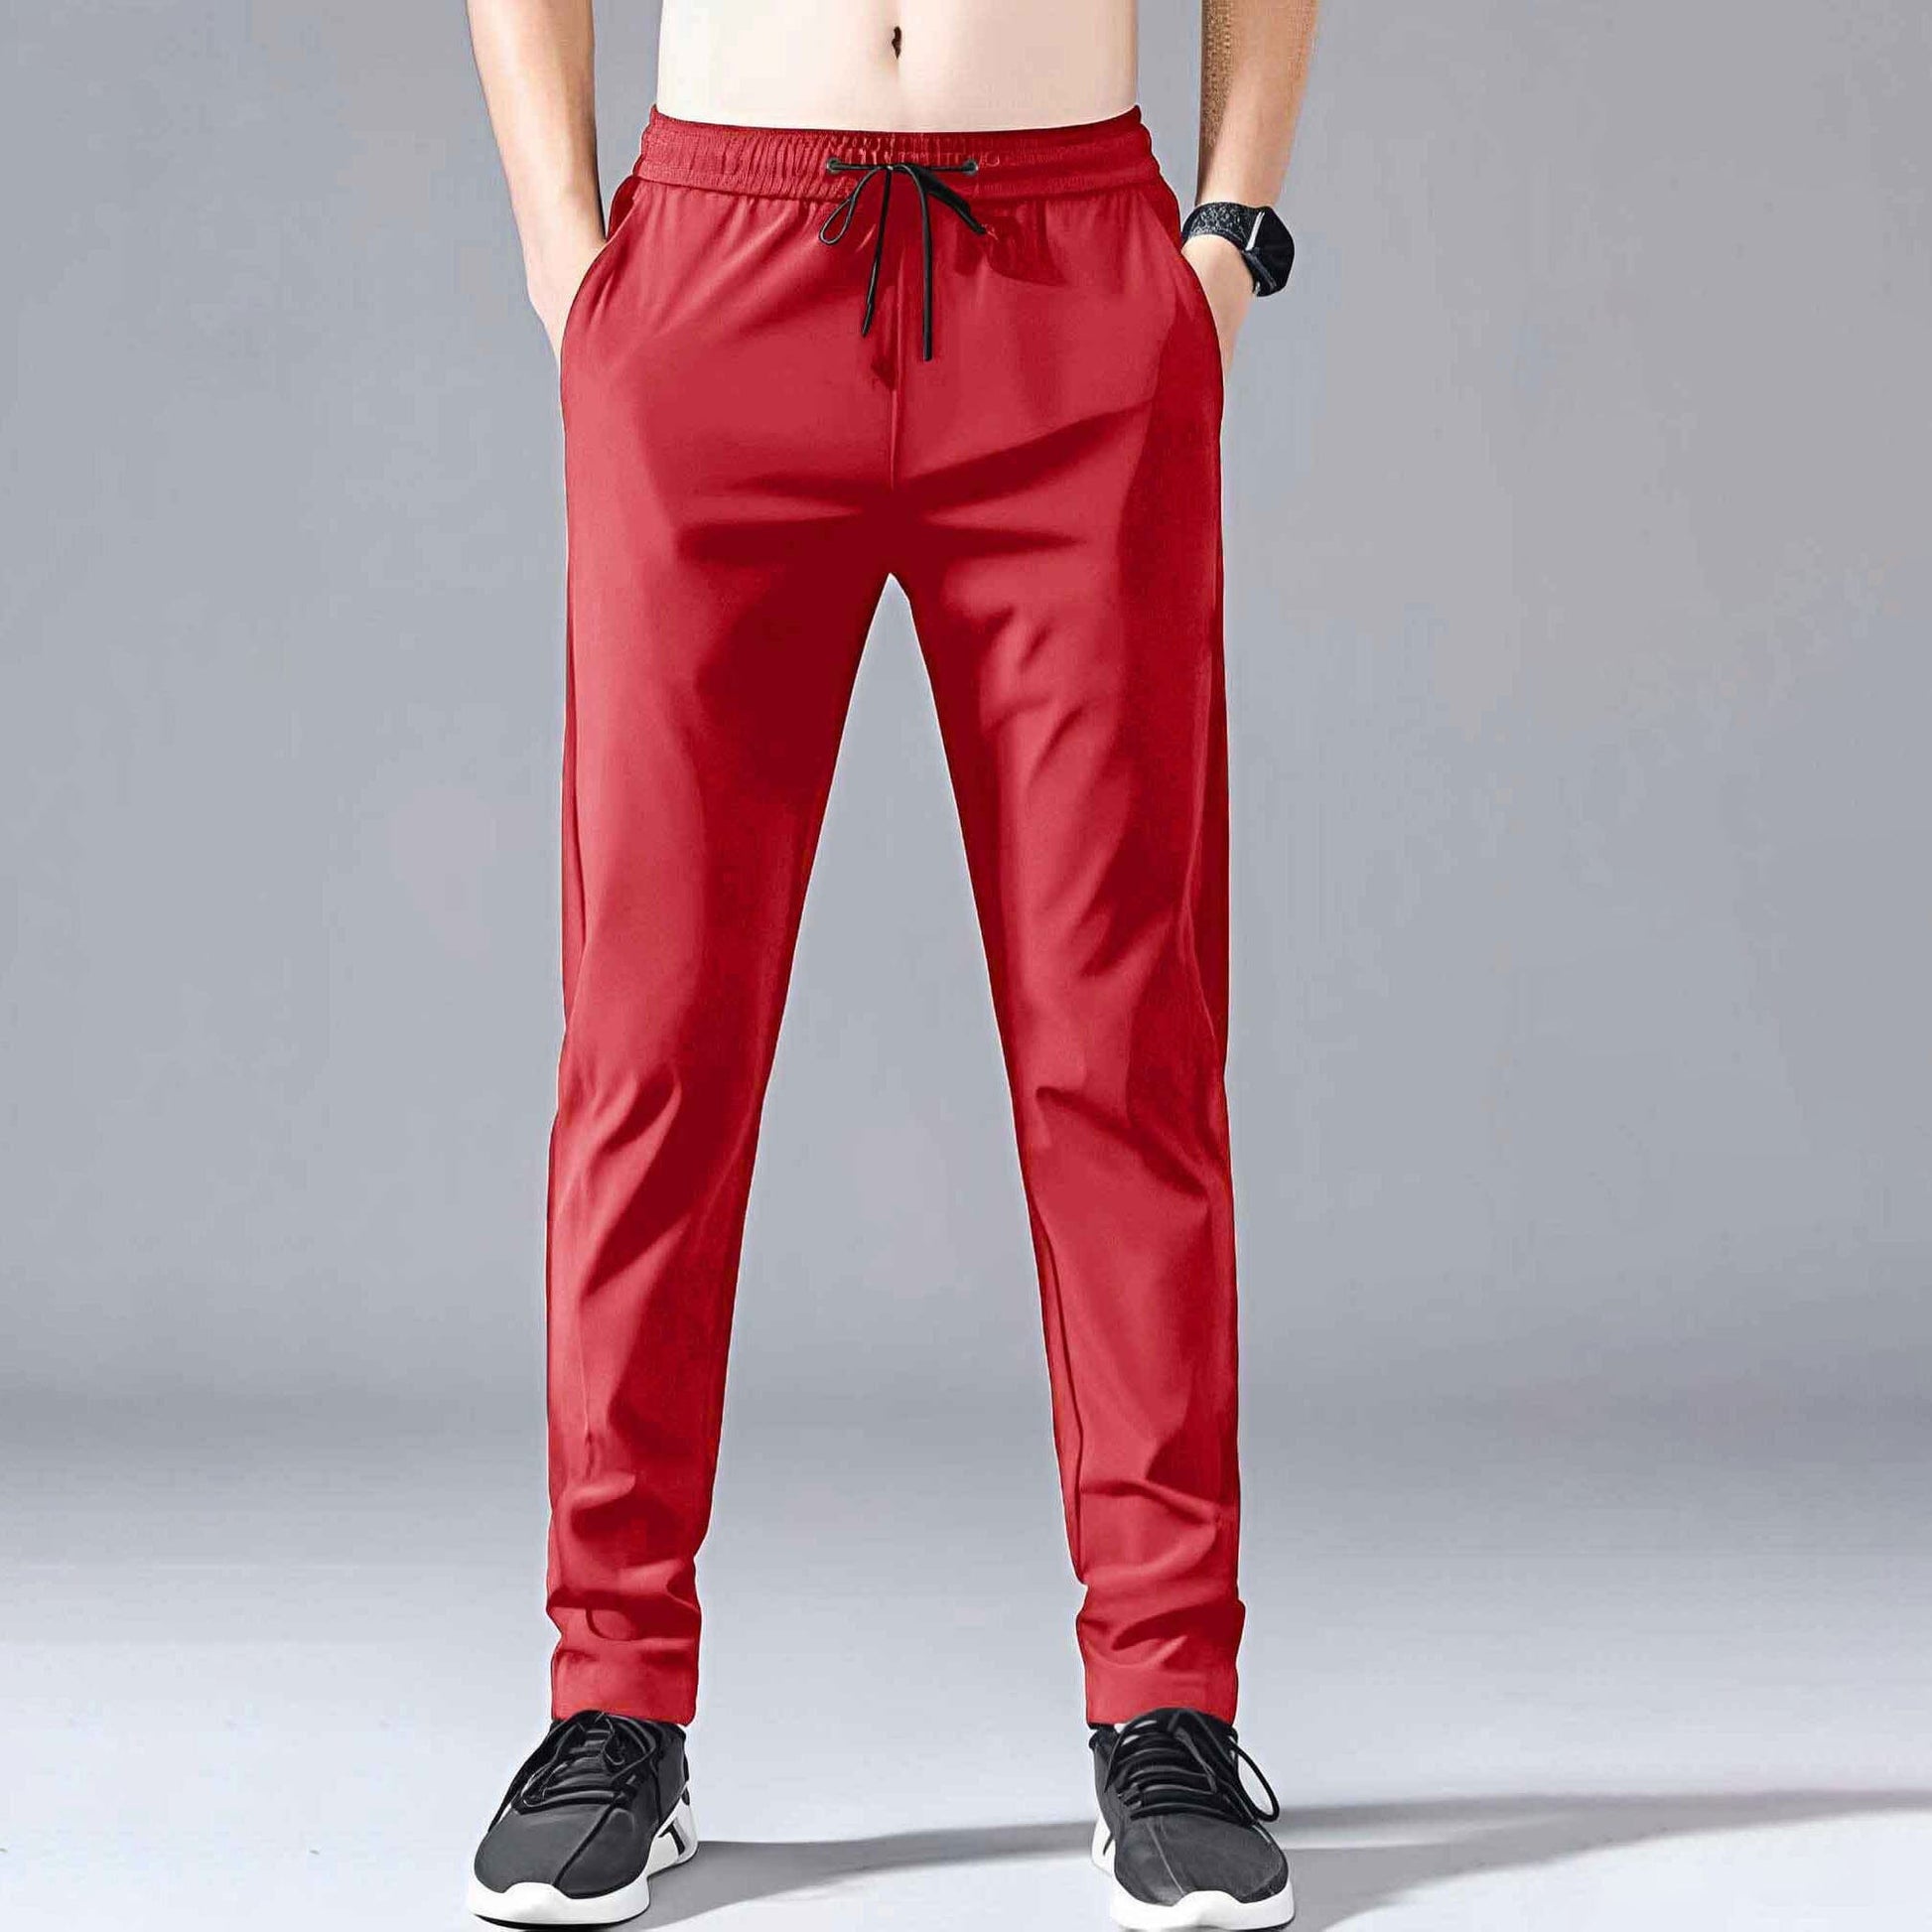 Polo Republica Men's Activewear Fast Dry Stretch Essentials Pants